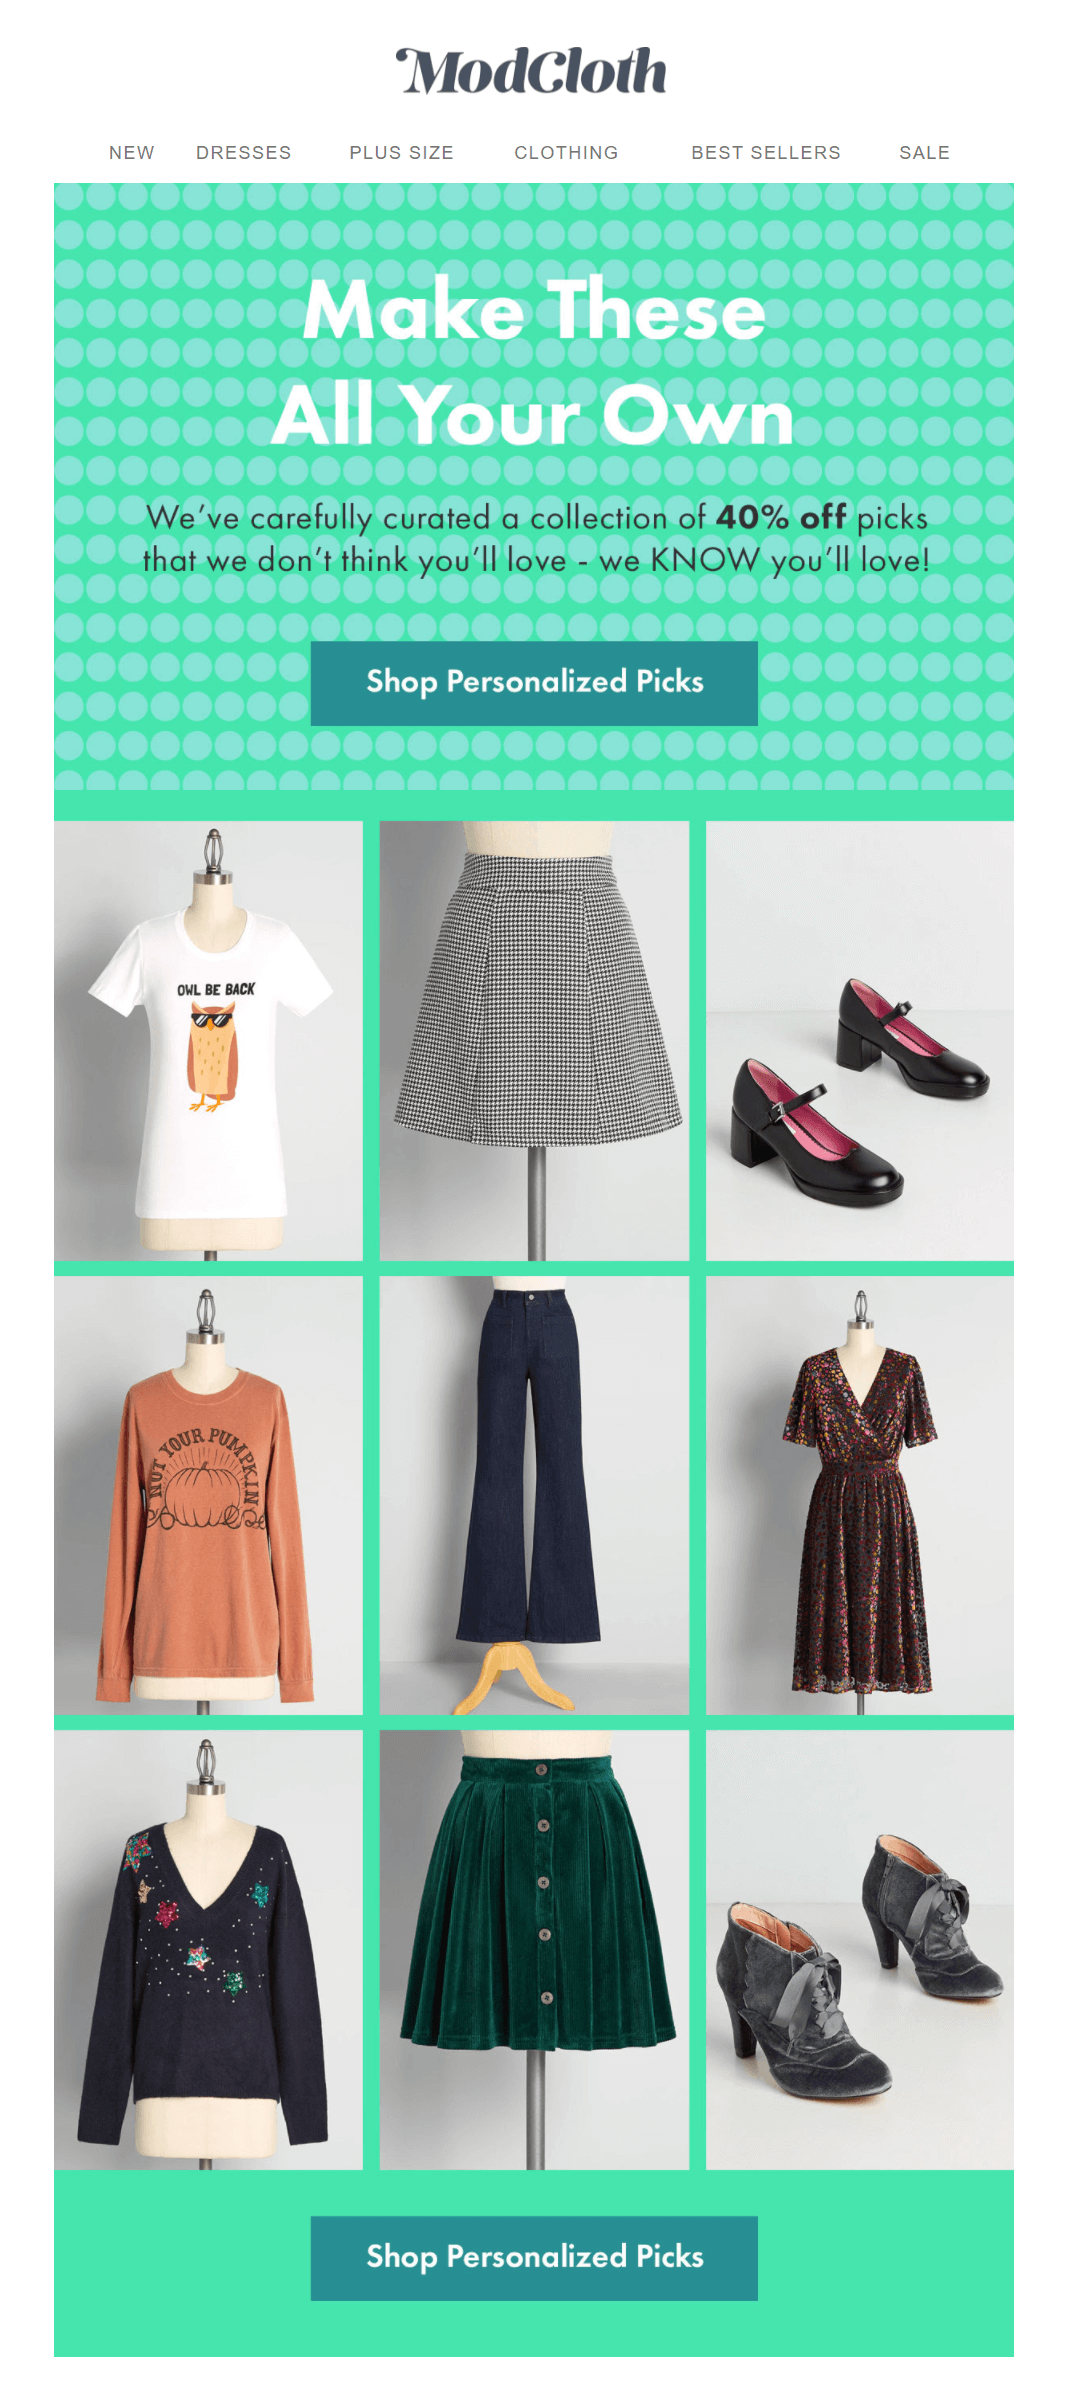 modcloth fashion email marketing product recommendations